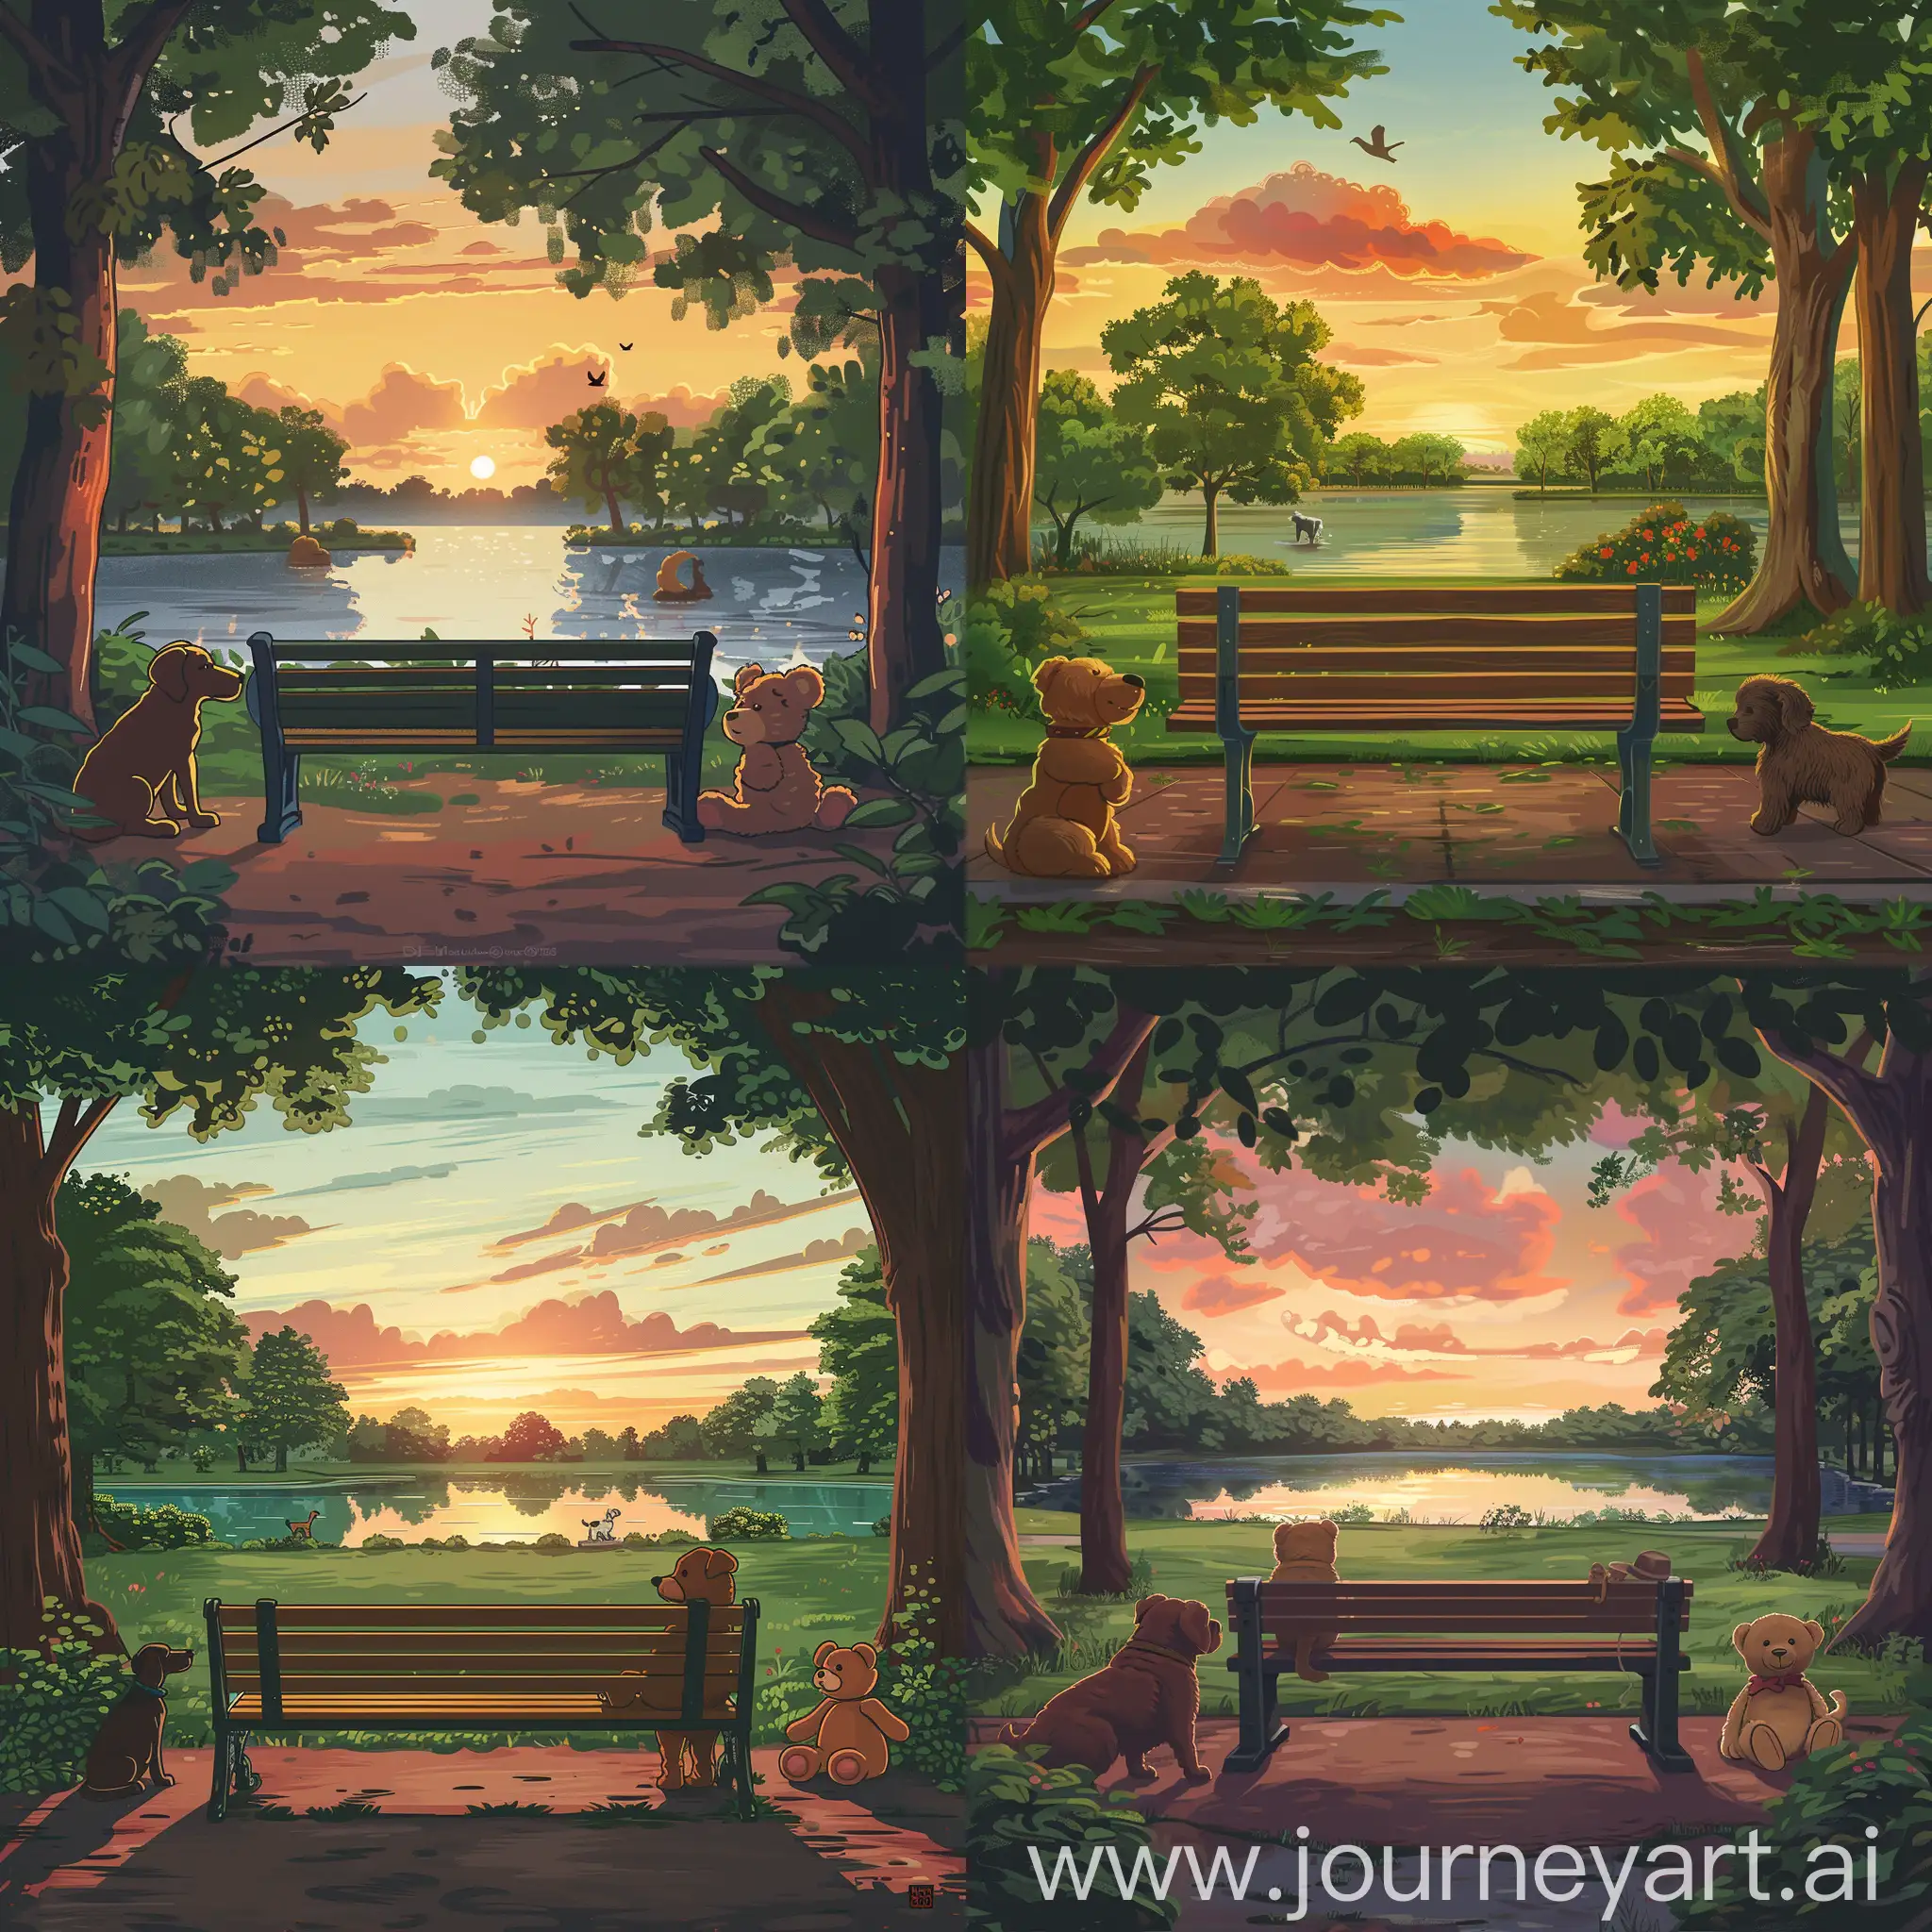 Sunset-Park-Bench-with-Dogs-by-the-Lake